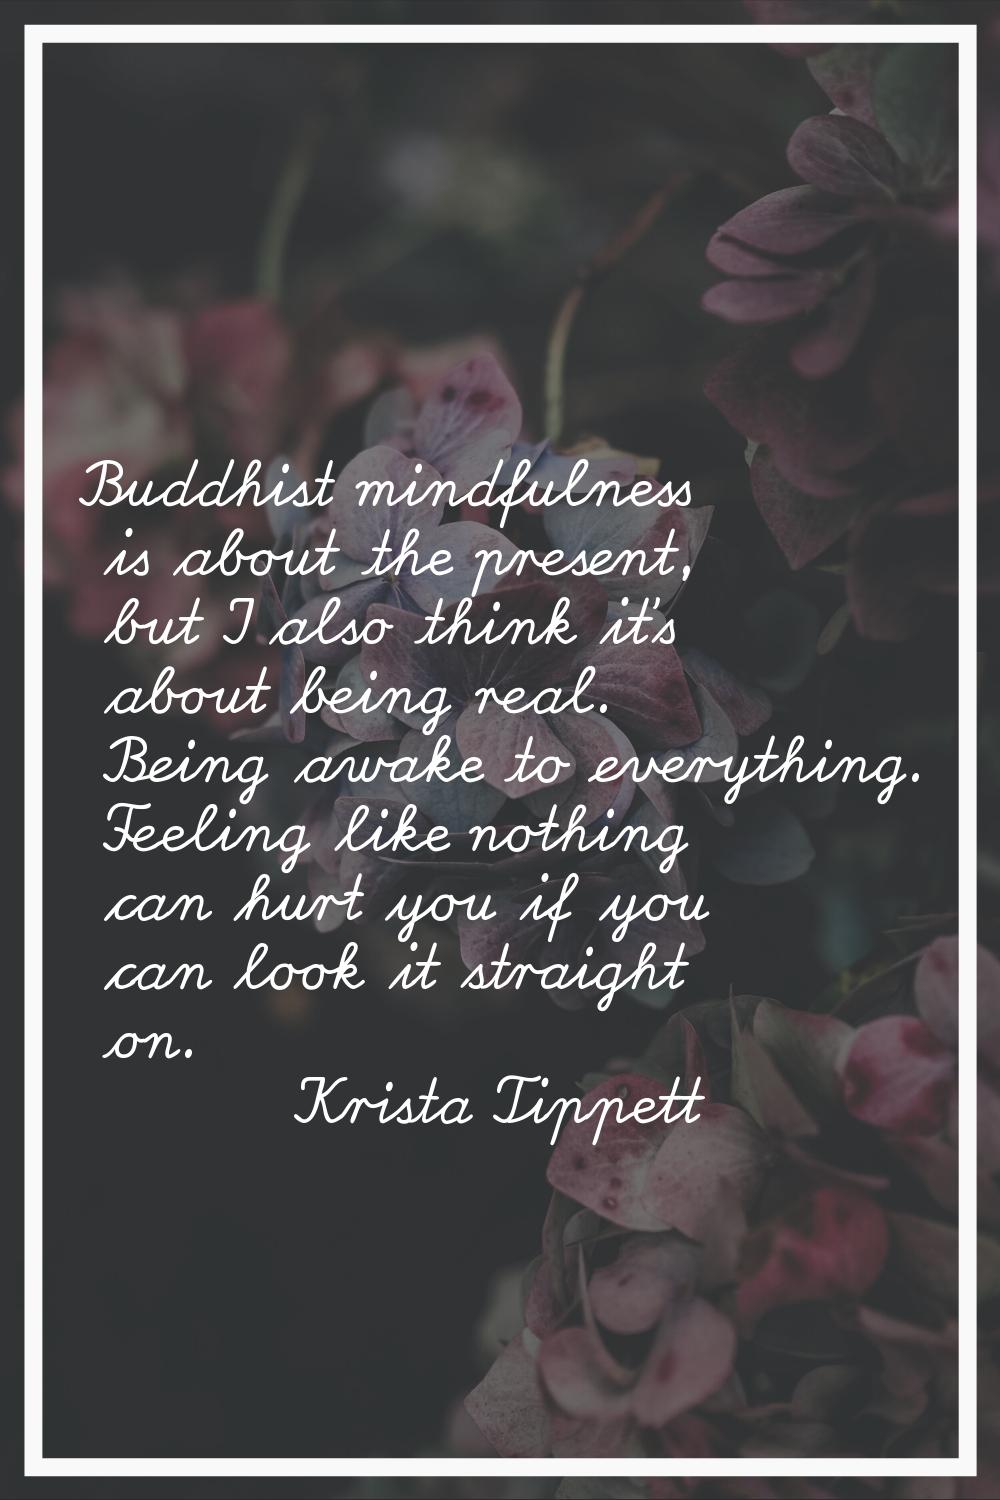 Buddhist mindfulness is about the present, but I also think it's about being real. Being awake to e